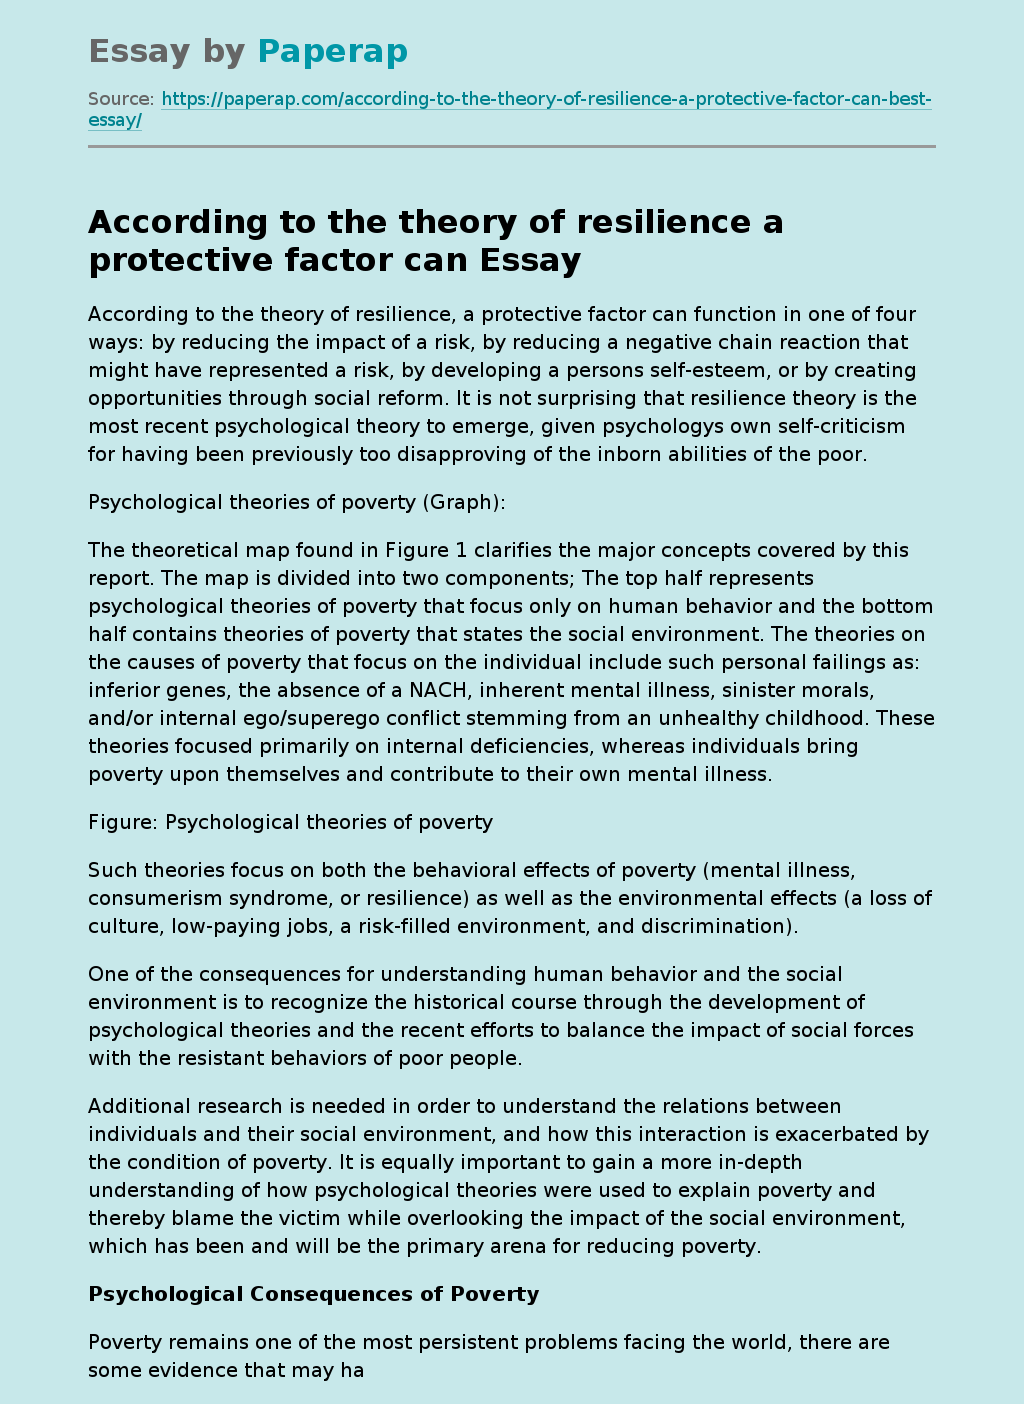 According to the theory of resilience a protective factor can